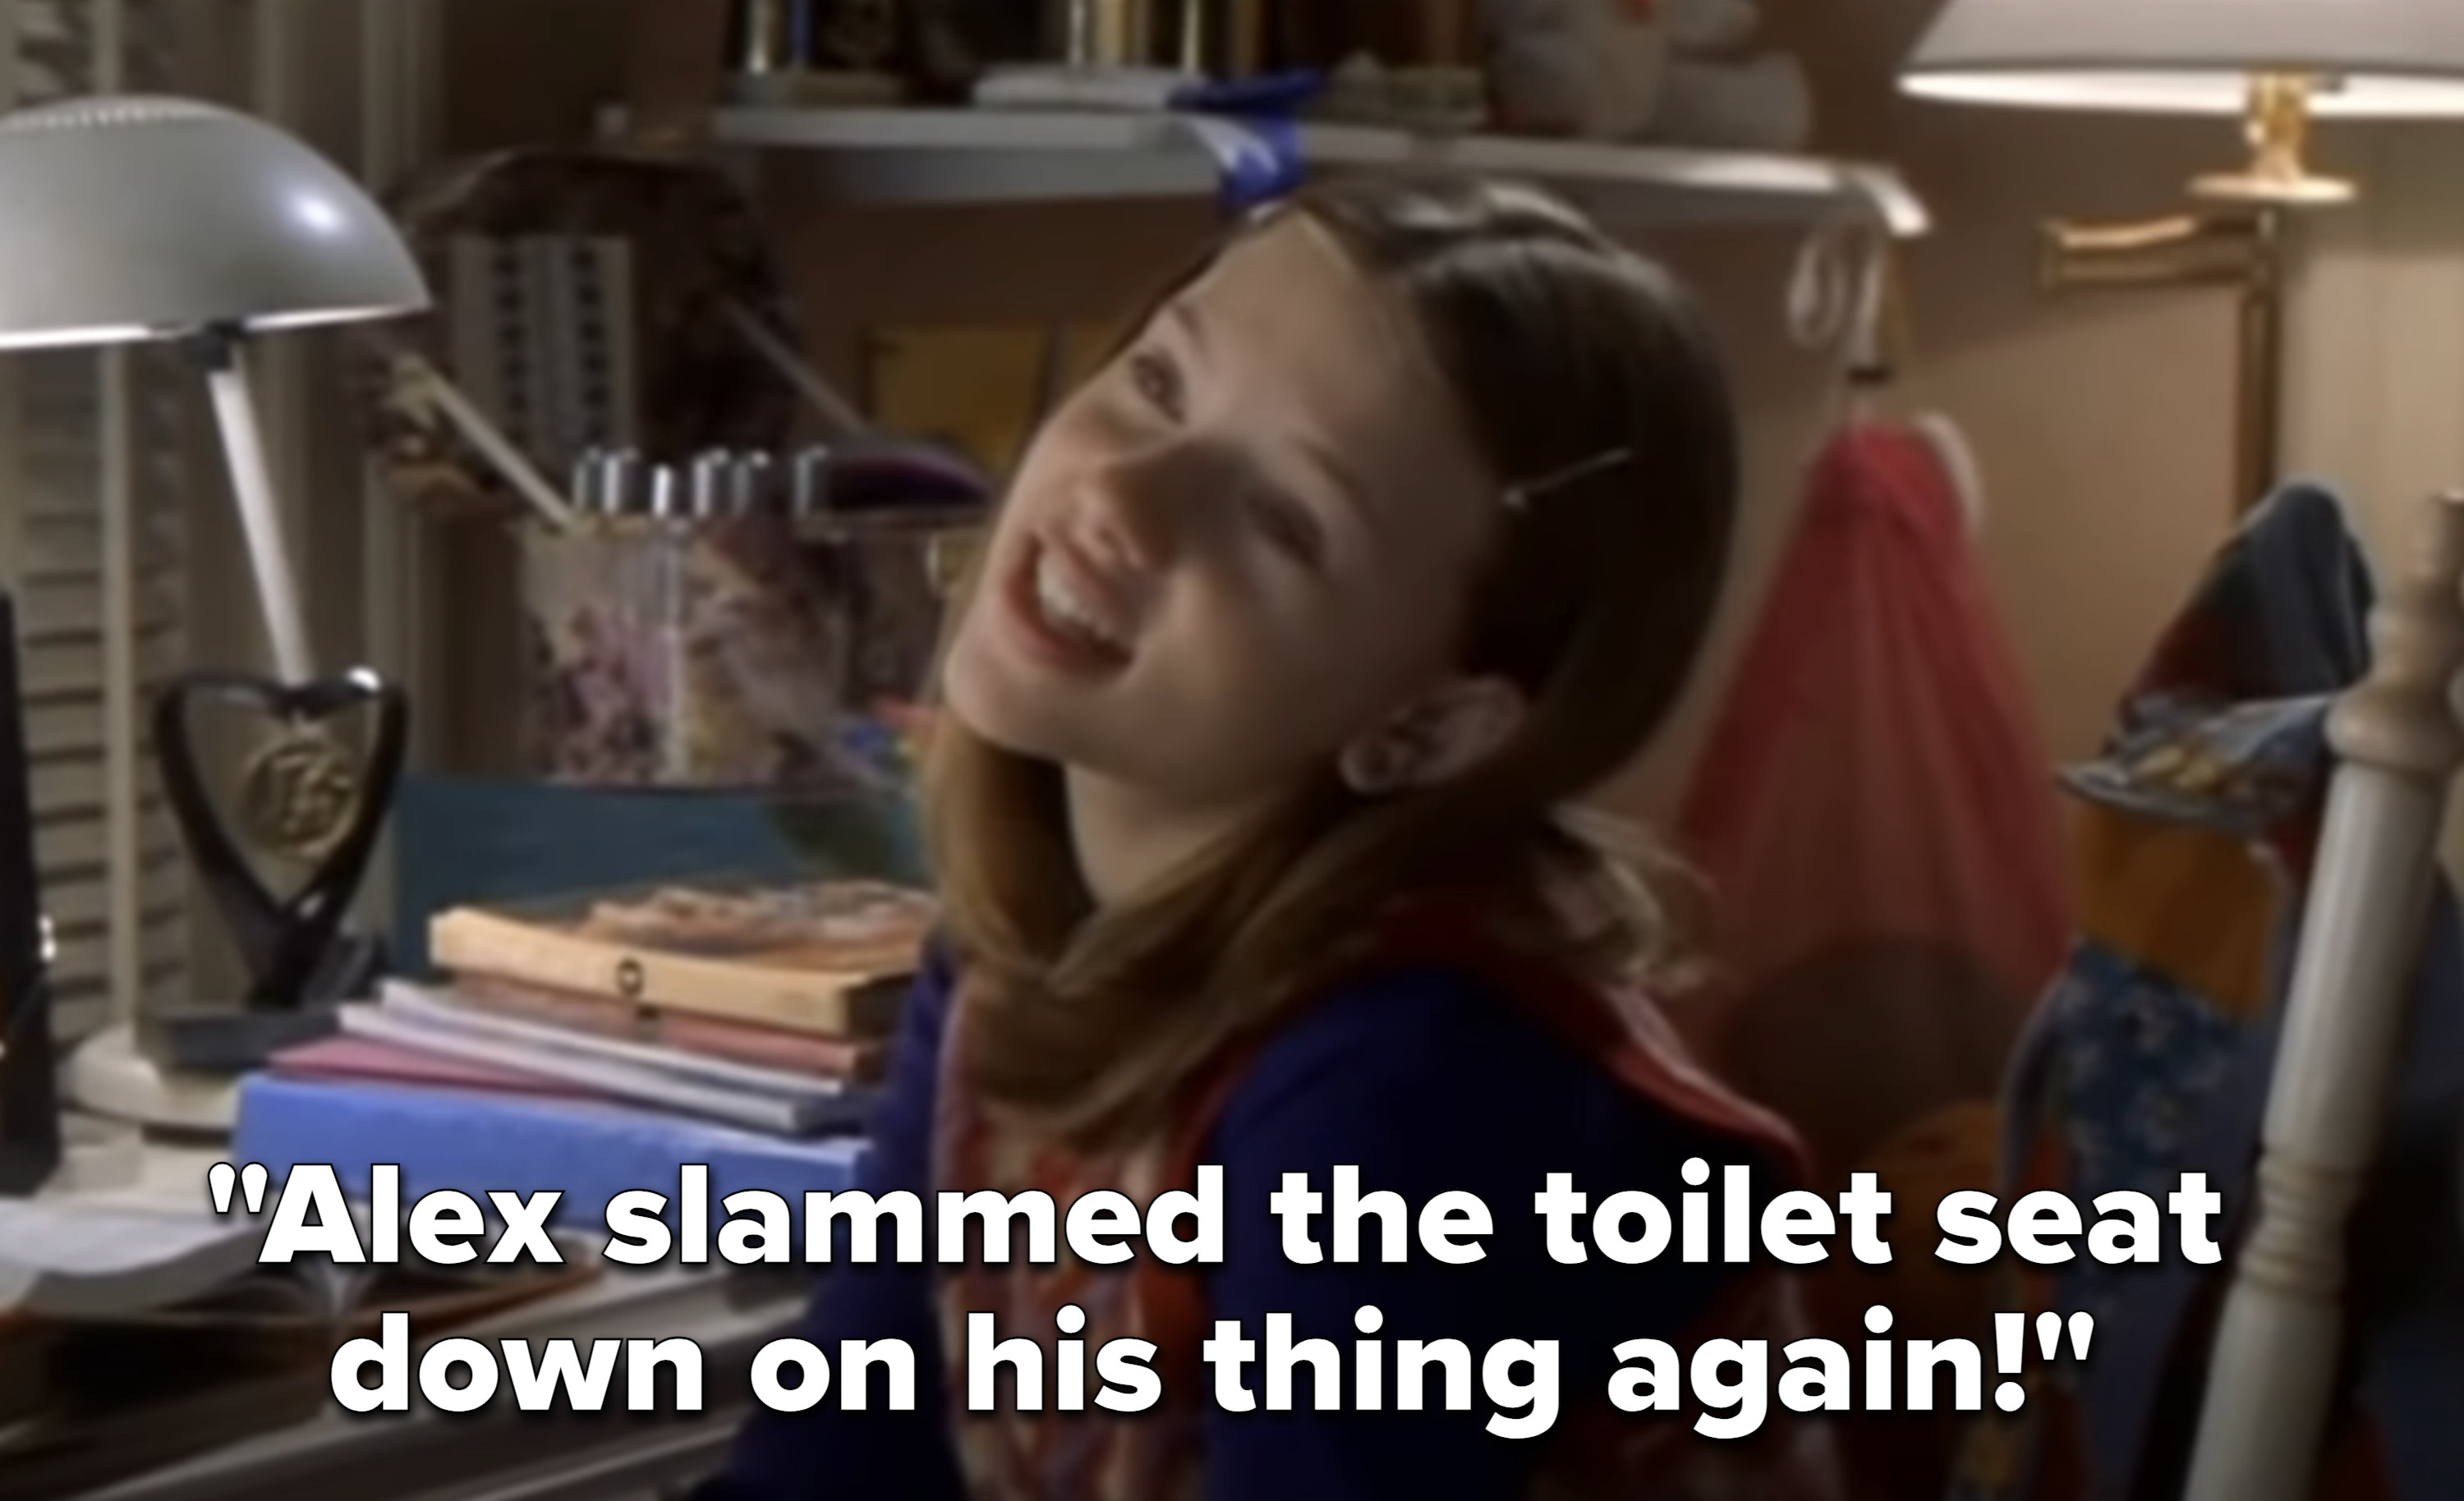 Molly shouts that Alex slammed the toilet seat down on his &quot;thing&quot; again